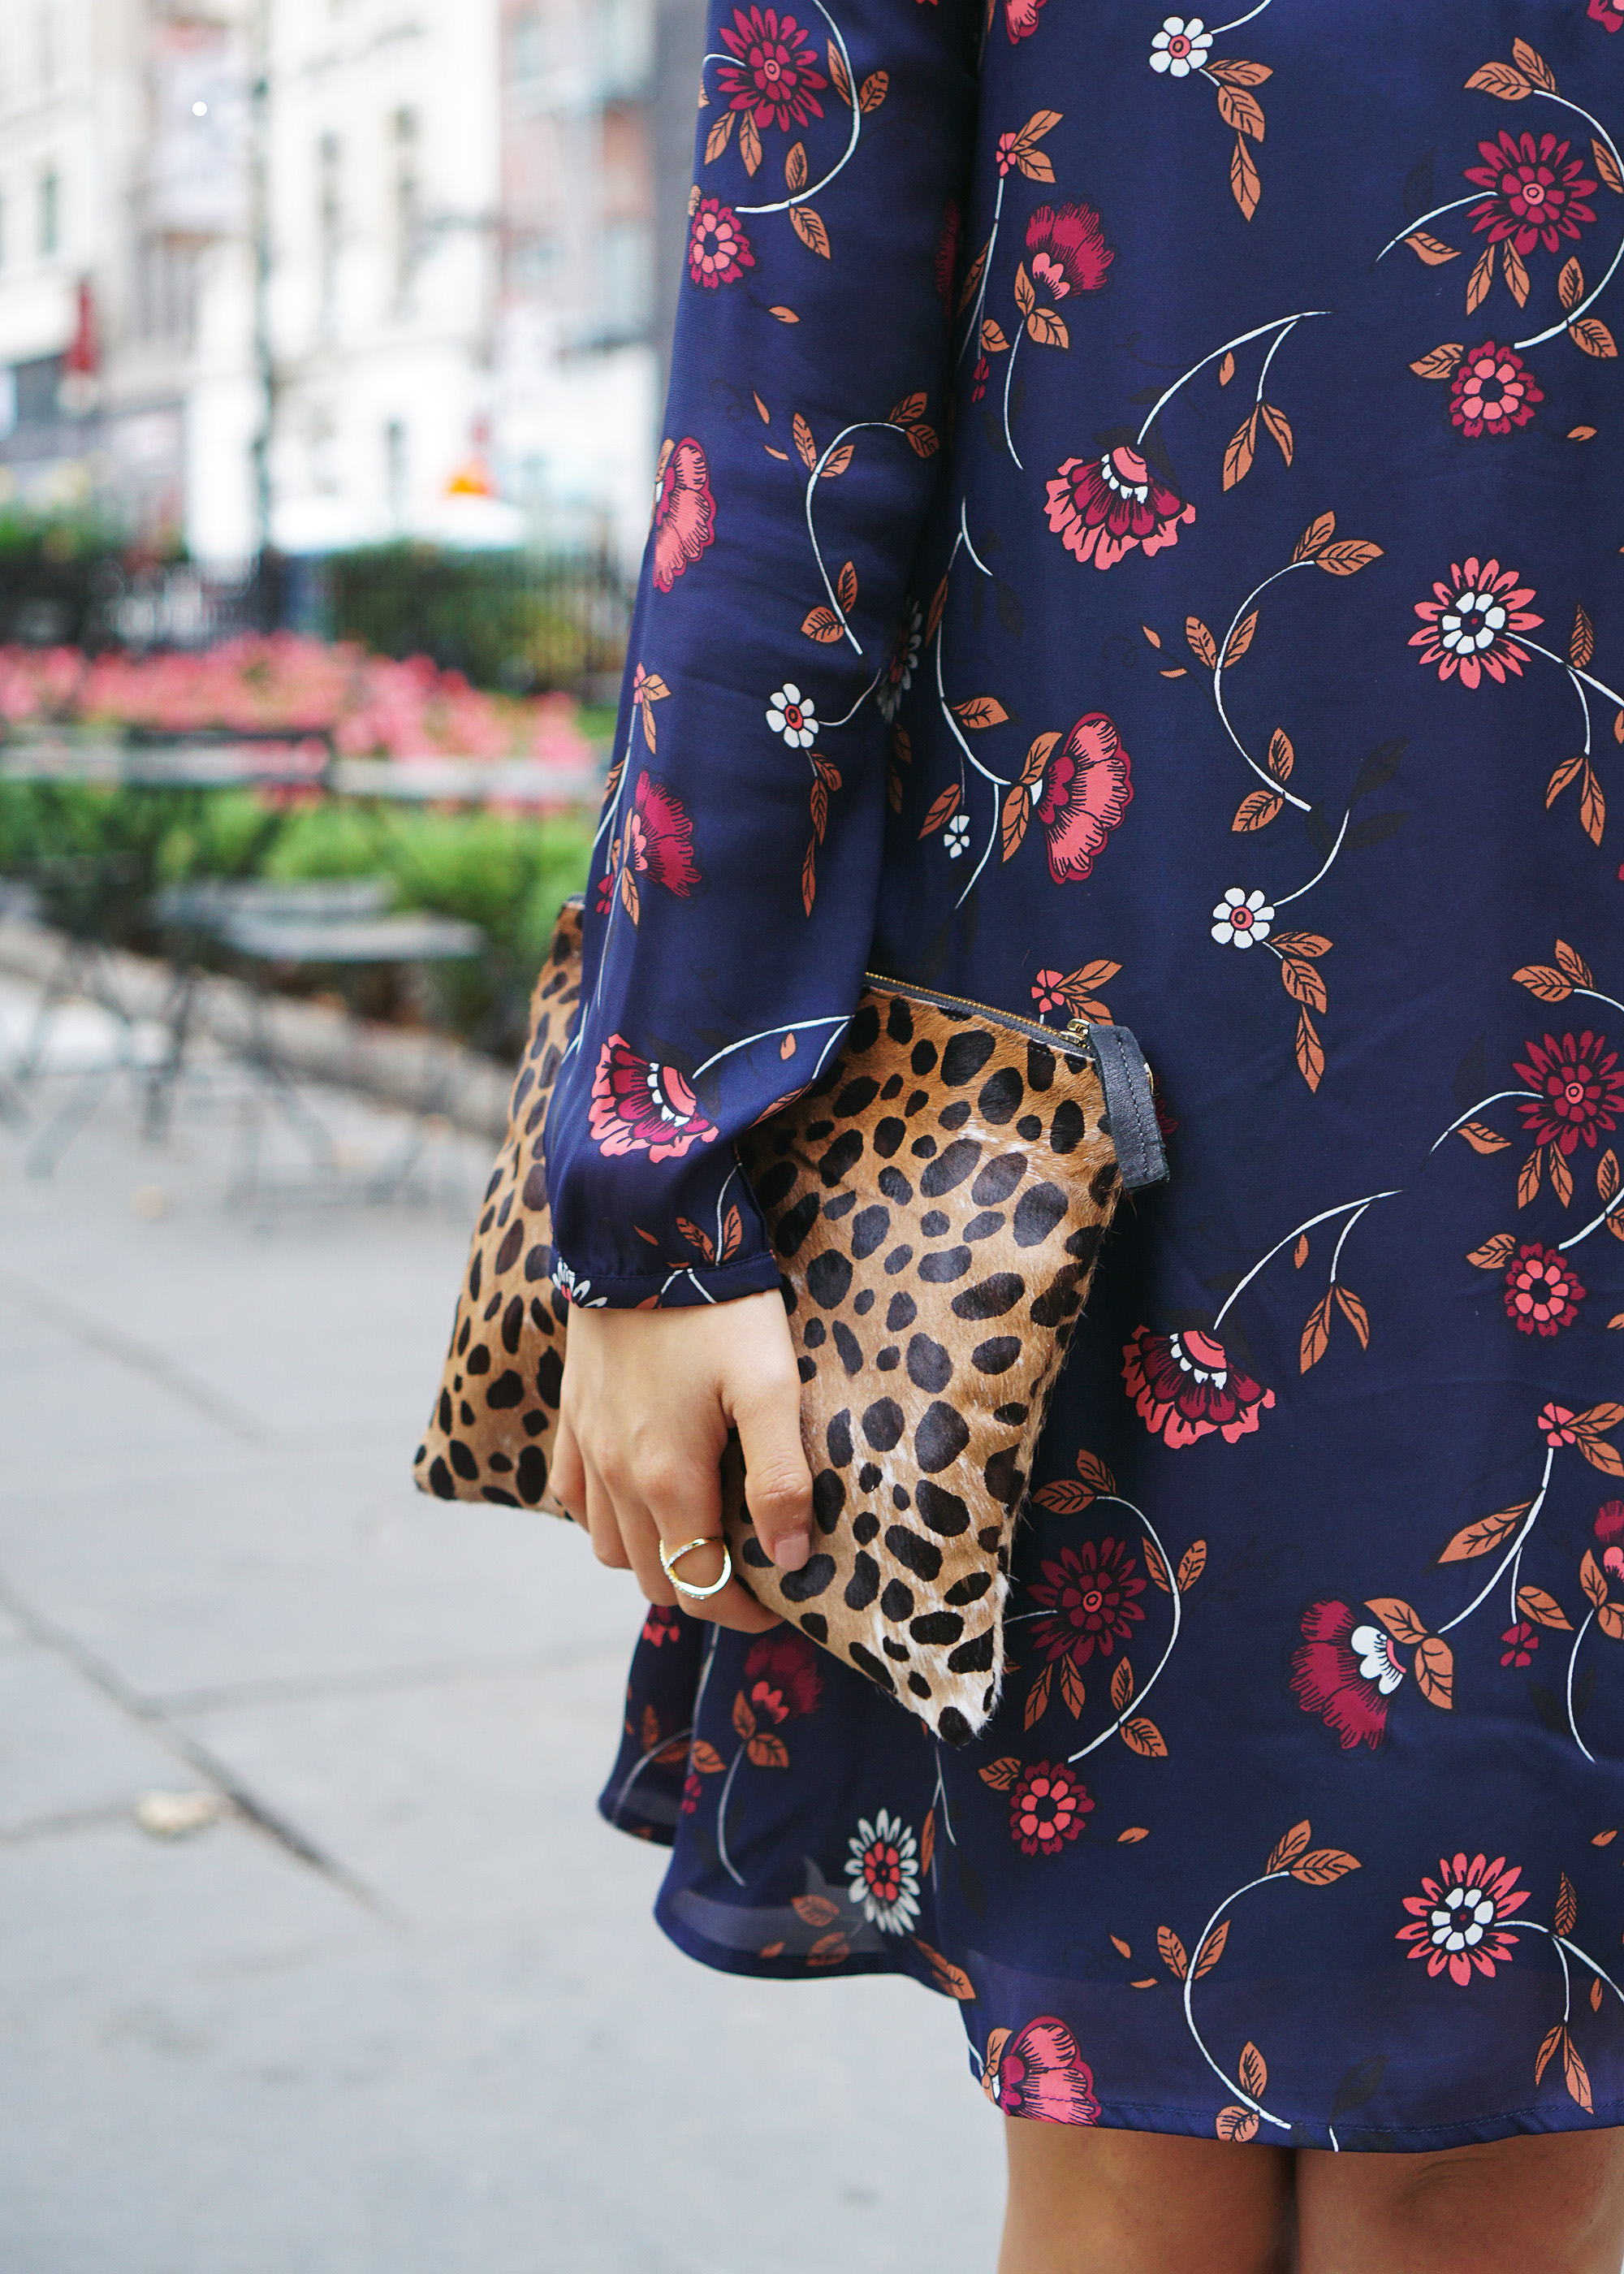 Skirt The Rules / Leopard & Floral Mixed Prints